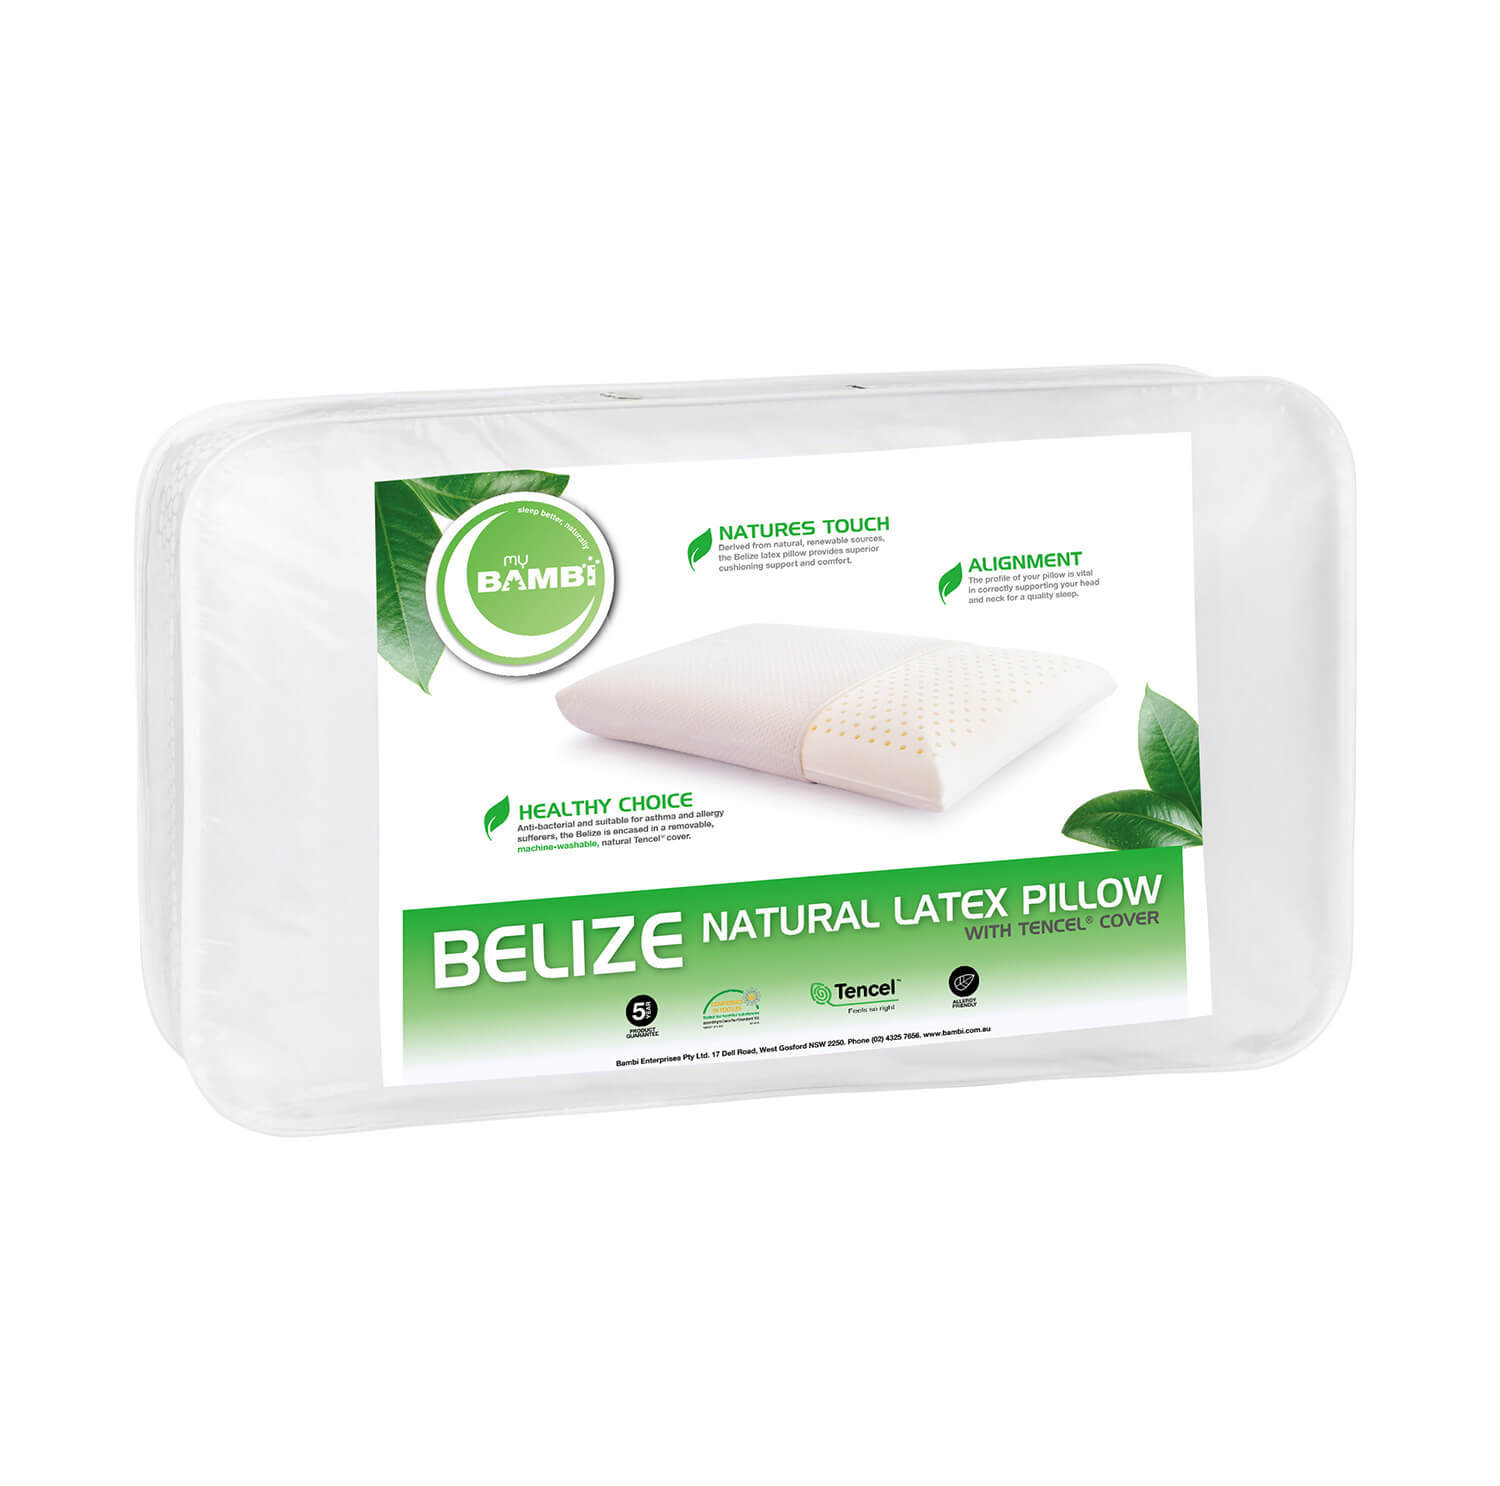 Belize Natural Latex Pillow by Bambi